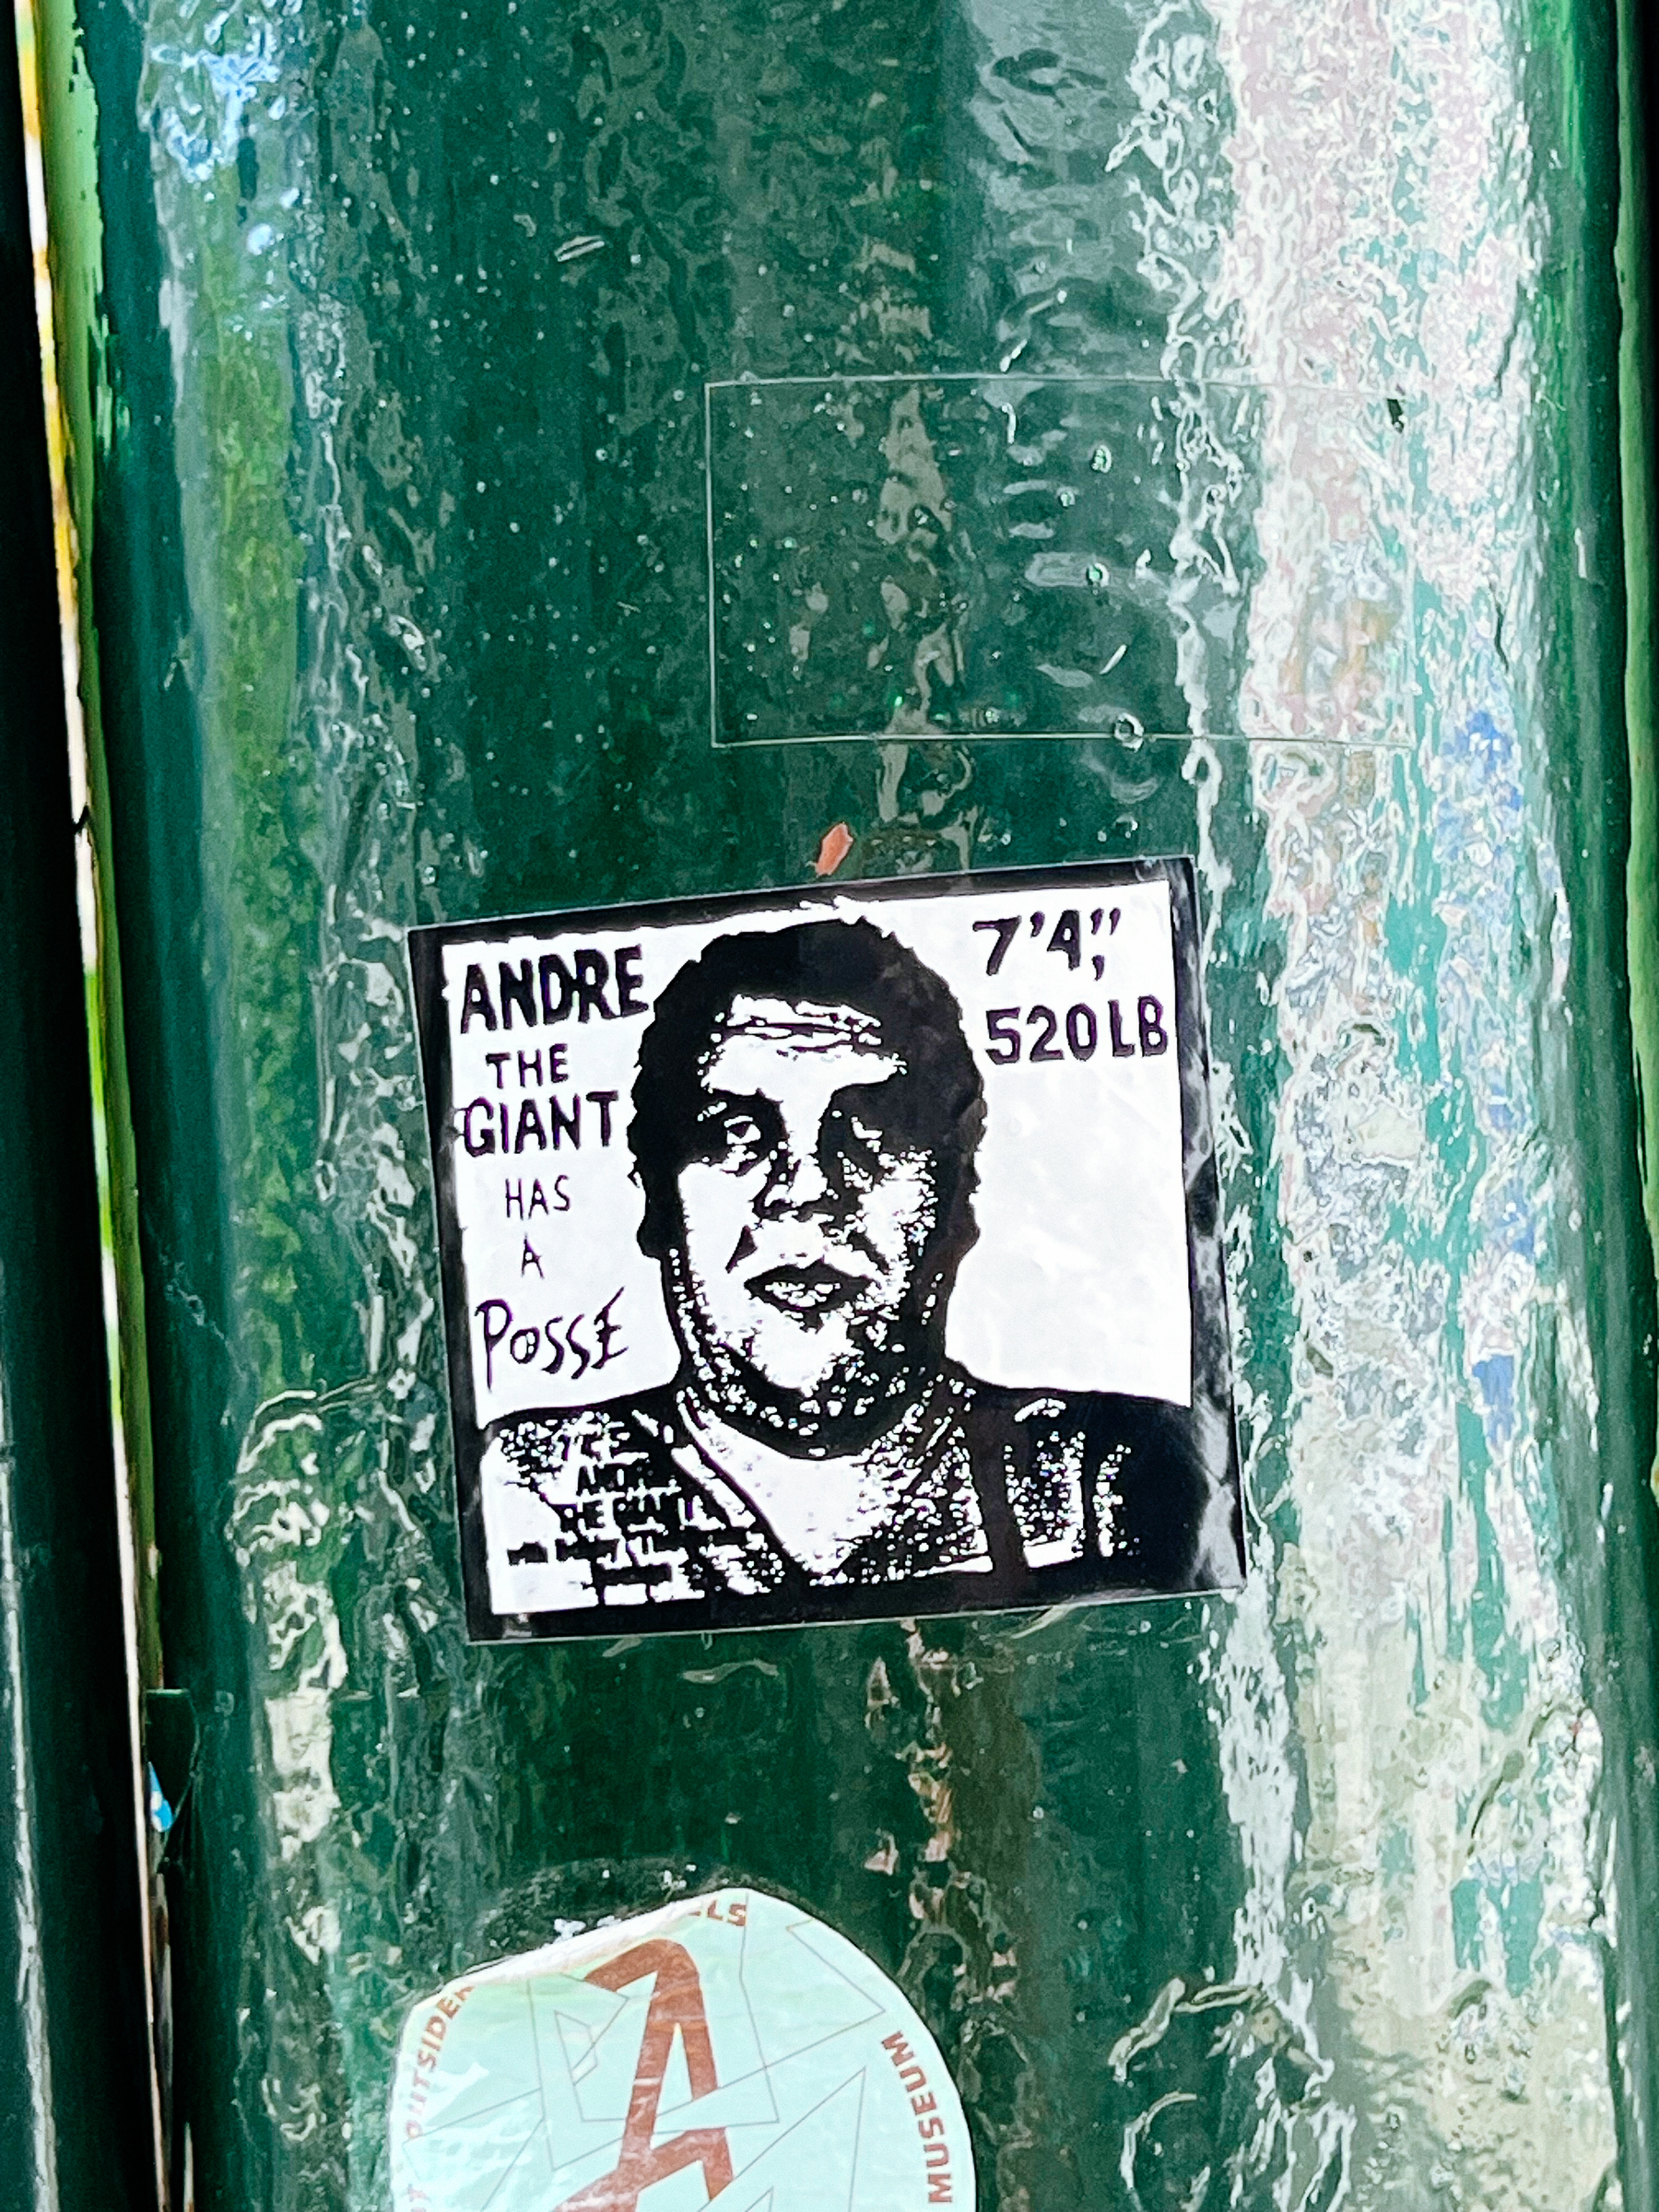 “Andre the Giant has a posse”, and a drawing of Andre the Giant. Sticker. 